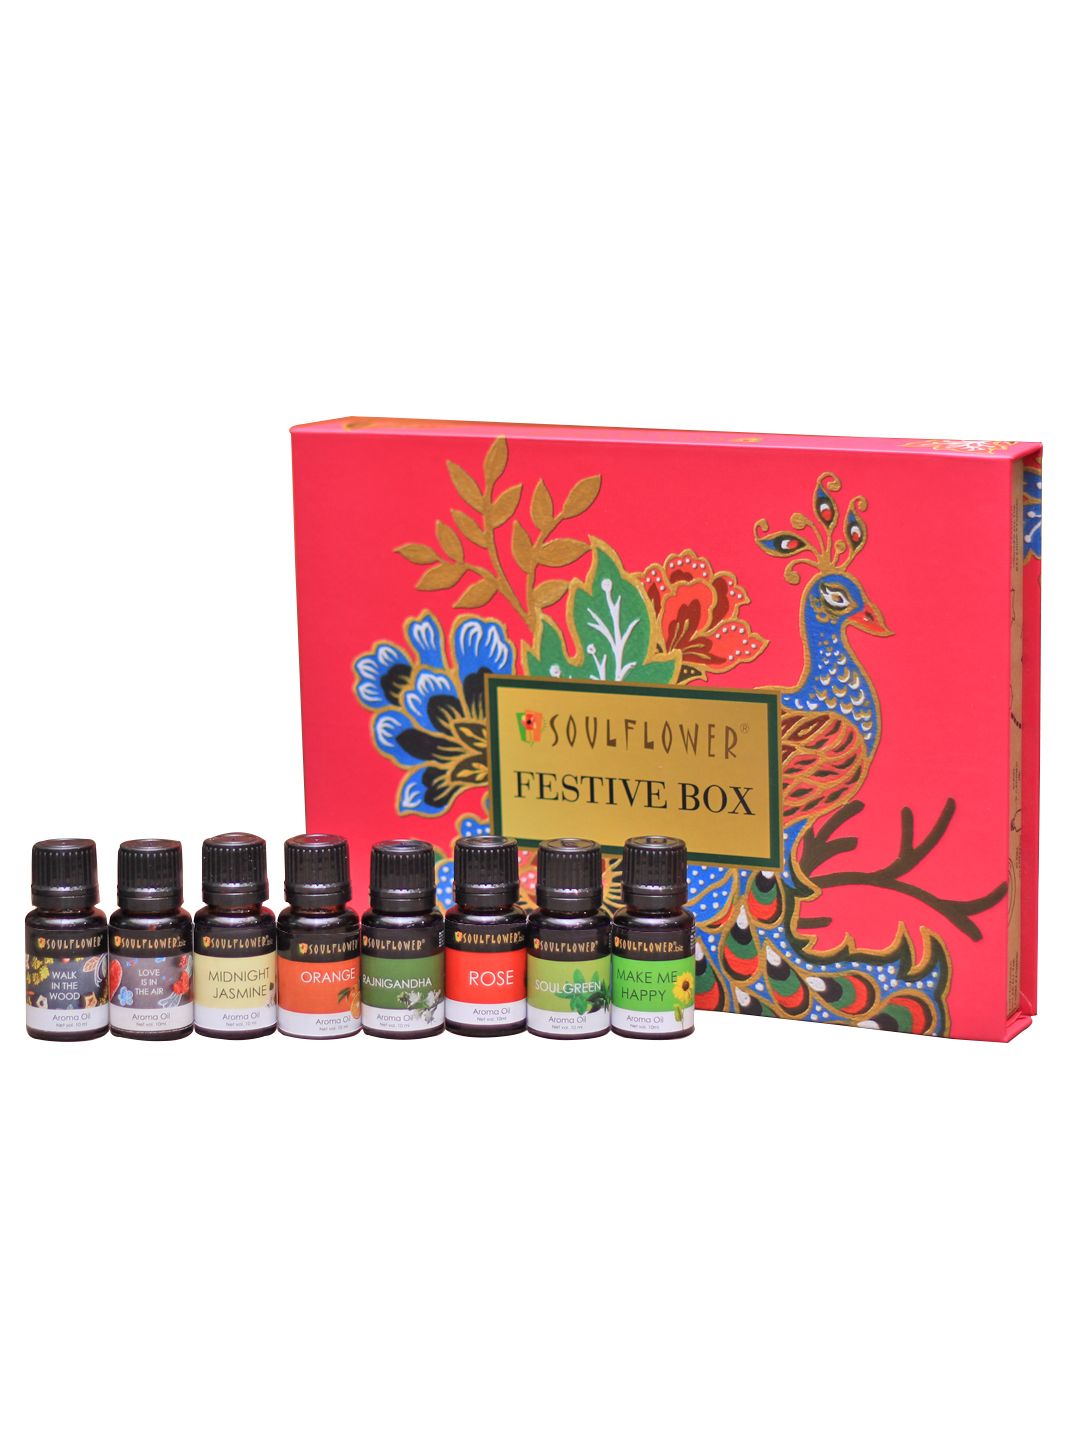 Soulflower Pure Aromatherapy Festive Gift Box- Set of 8 Aroma Oils - 800 g Price in India